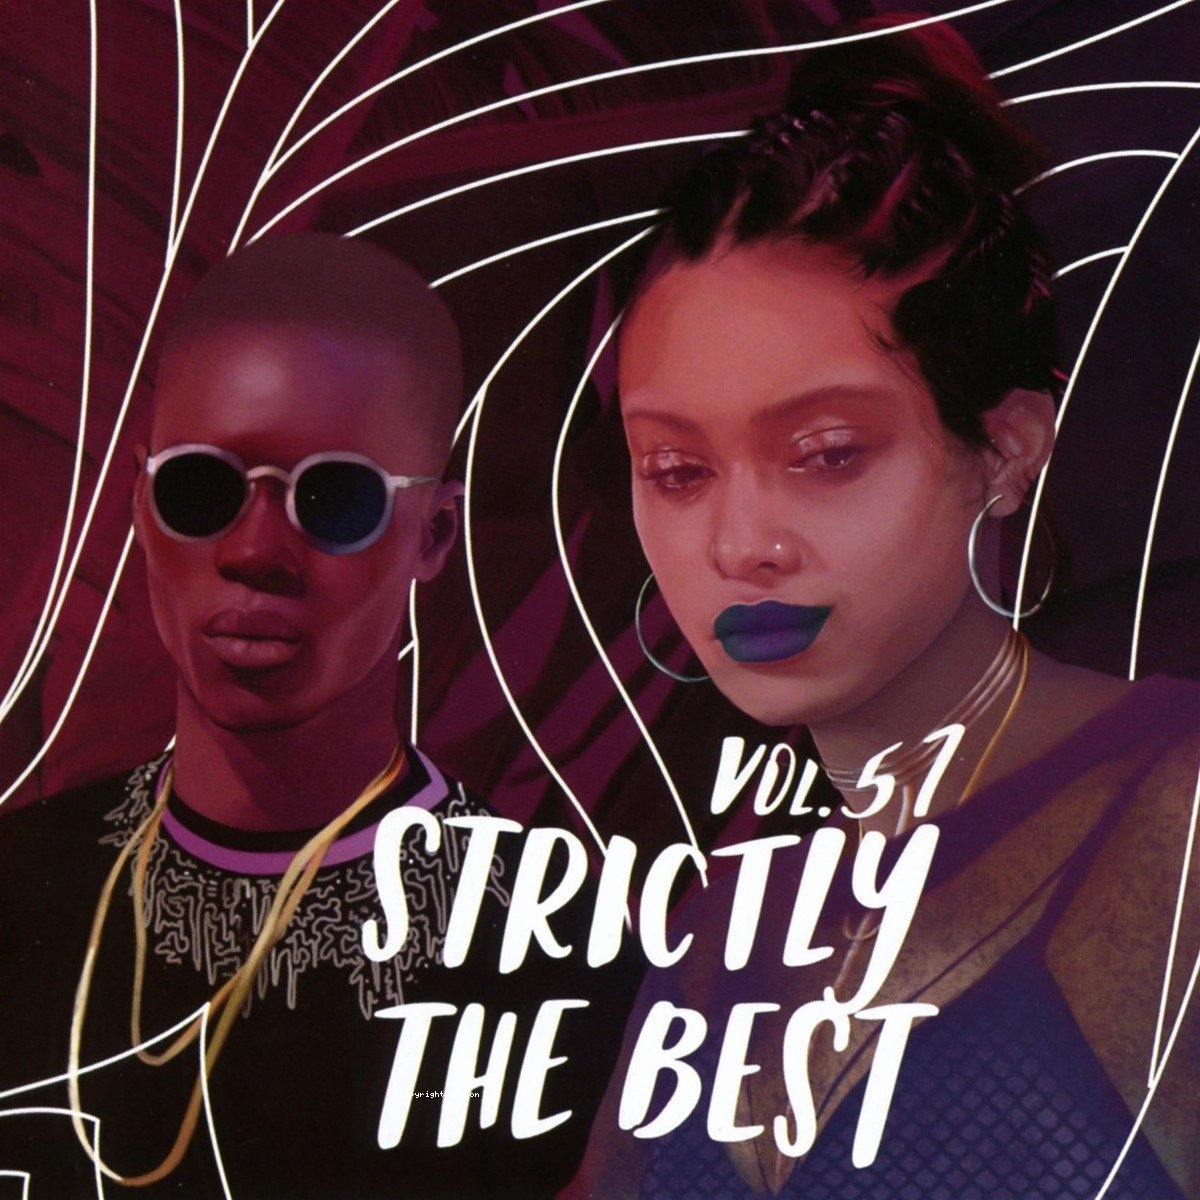 Strictly the best - Volume 57 dancehall edition